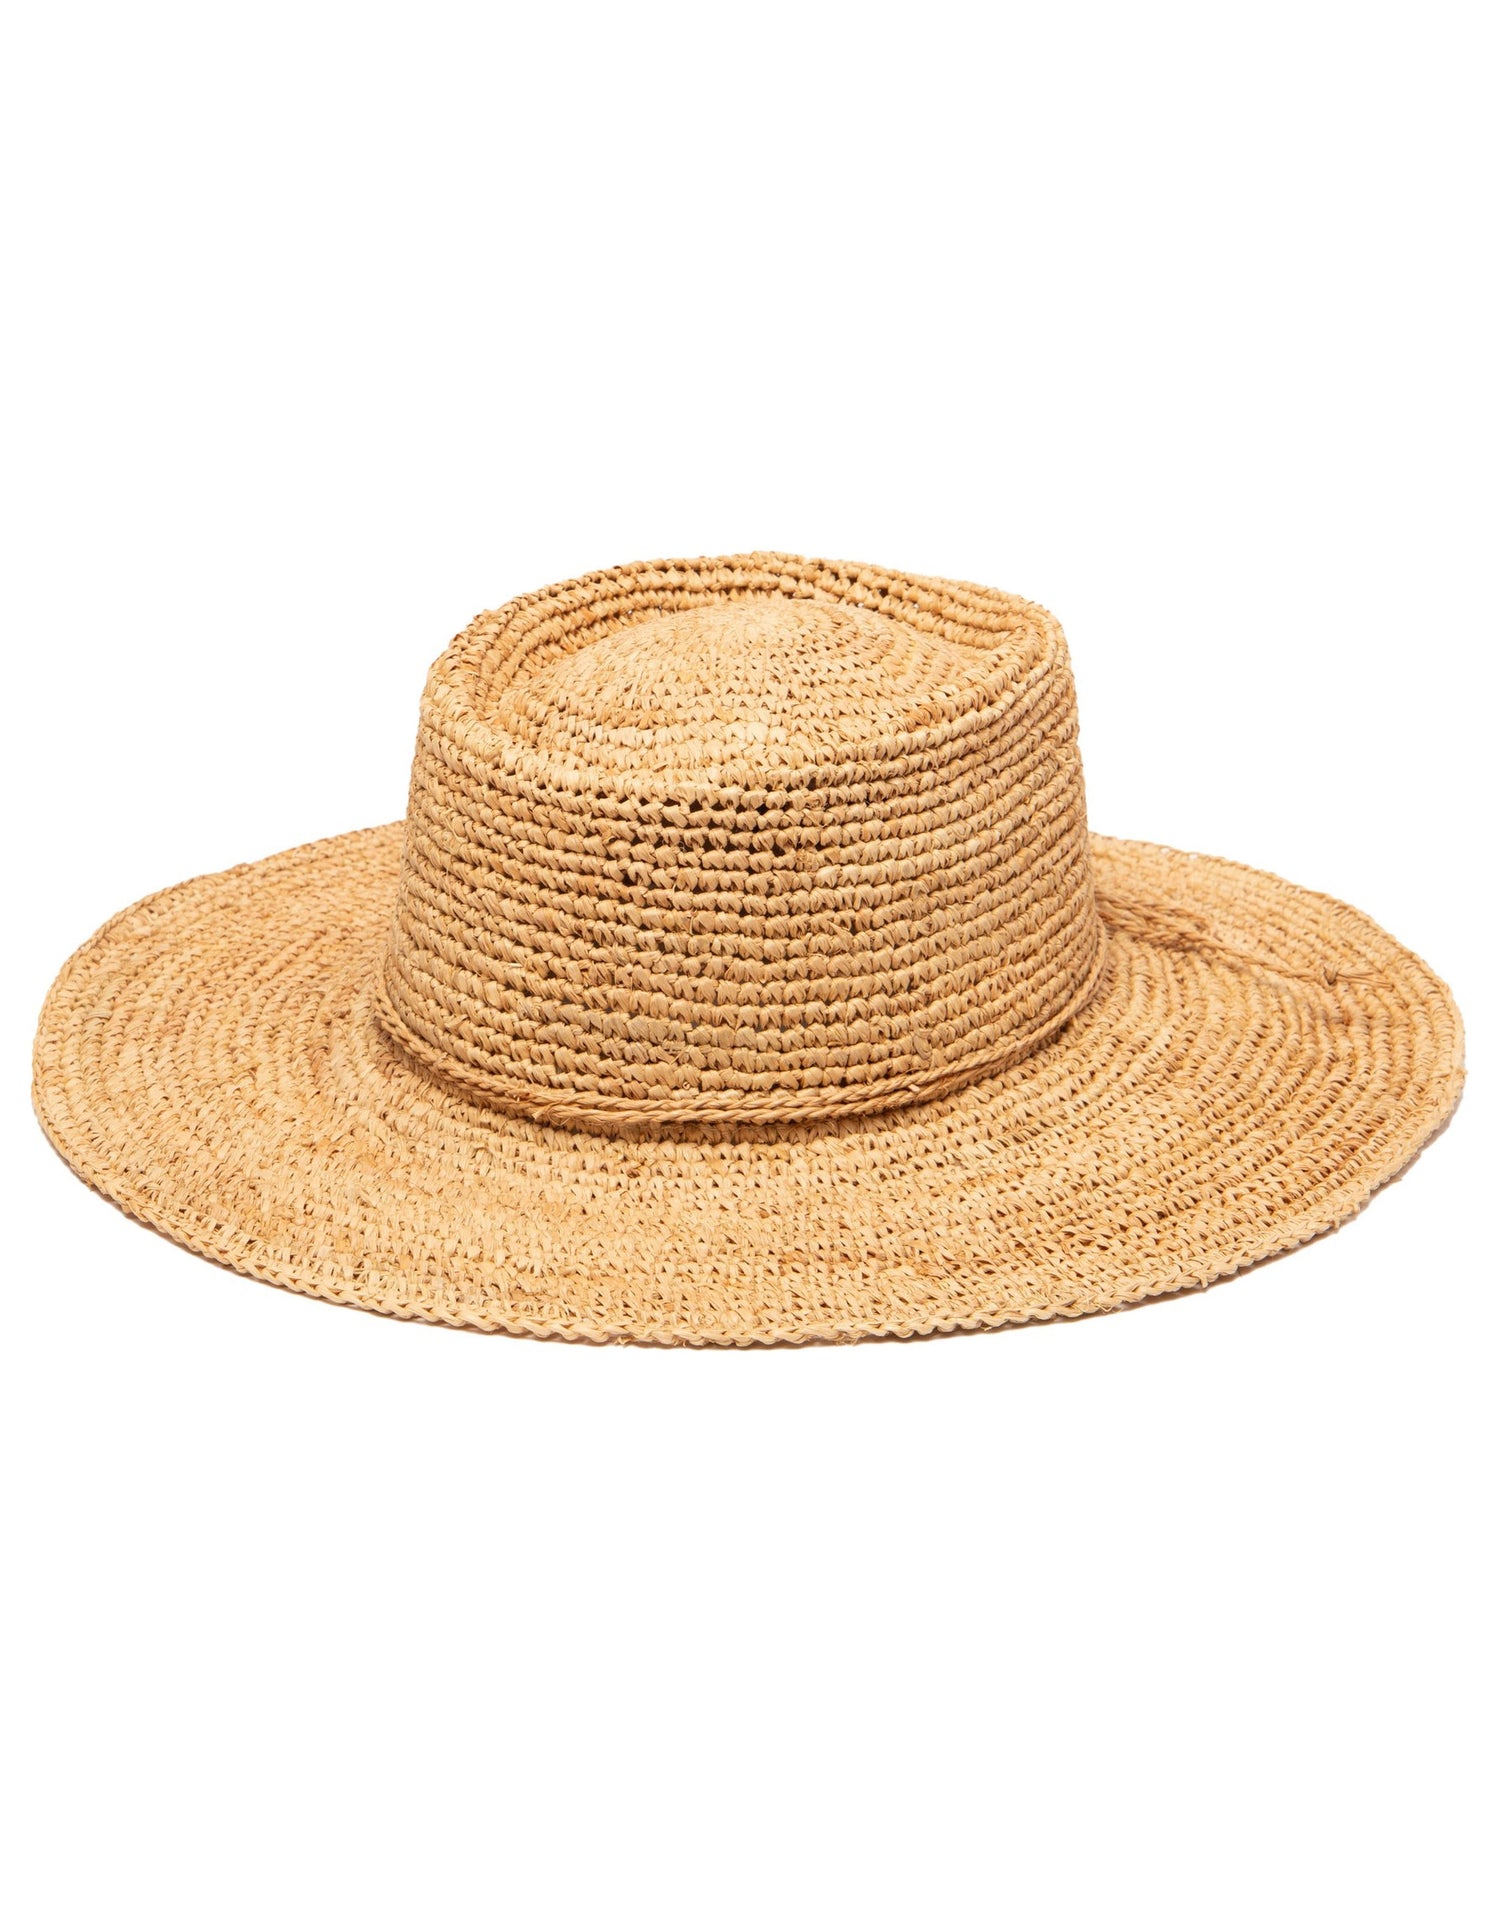 Oval Crown Raffia Hat by San Diego Hat Company in Natural - Angled View